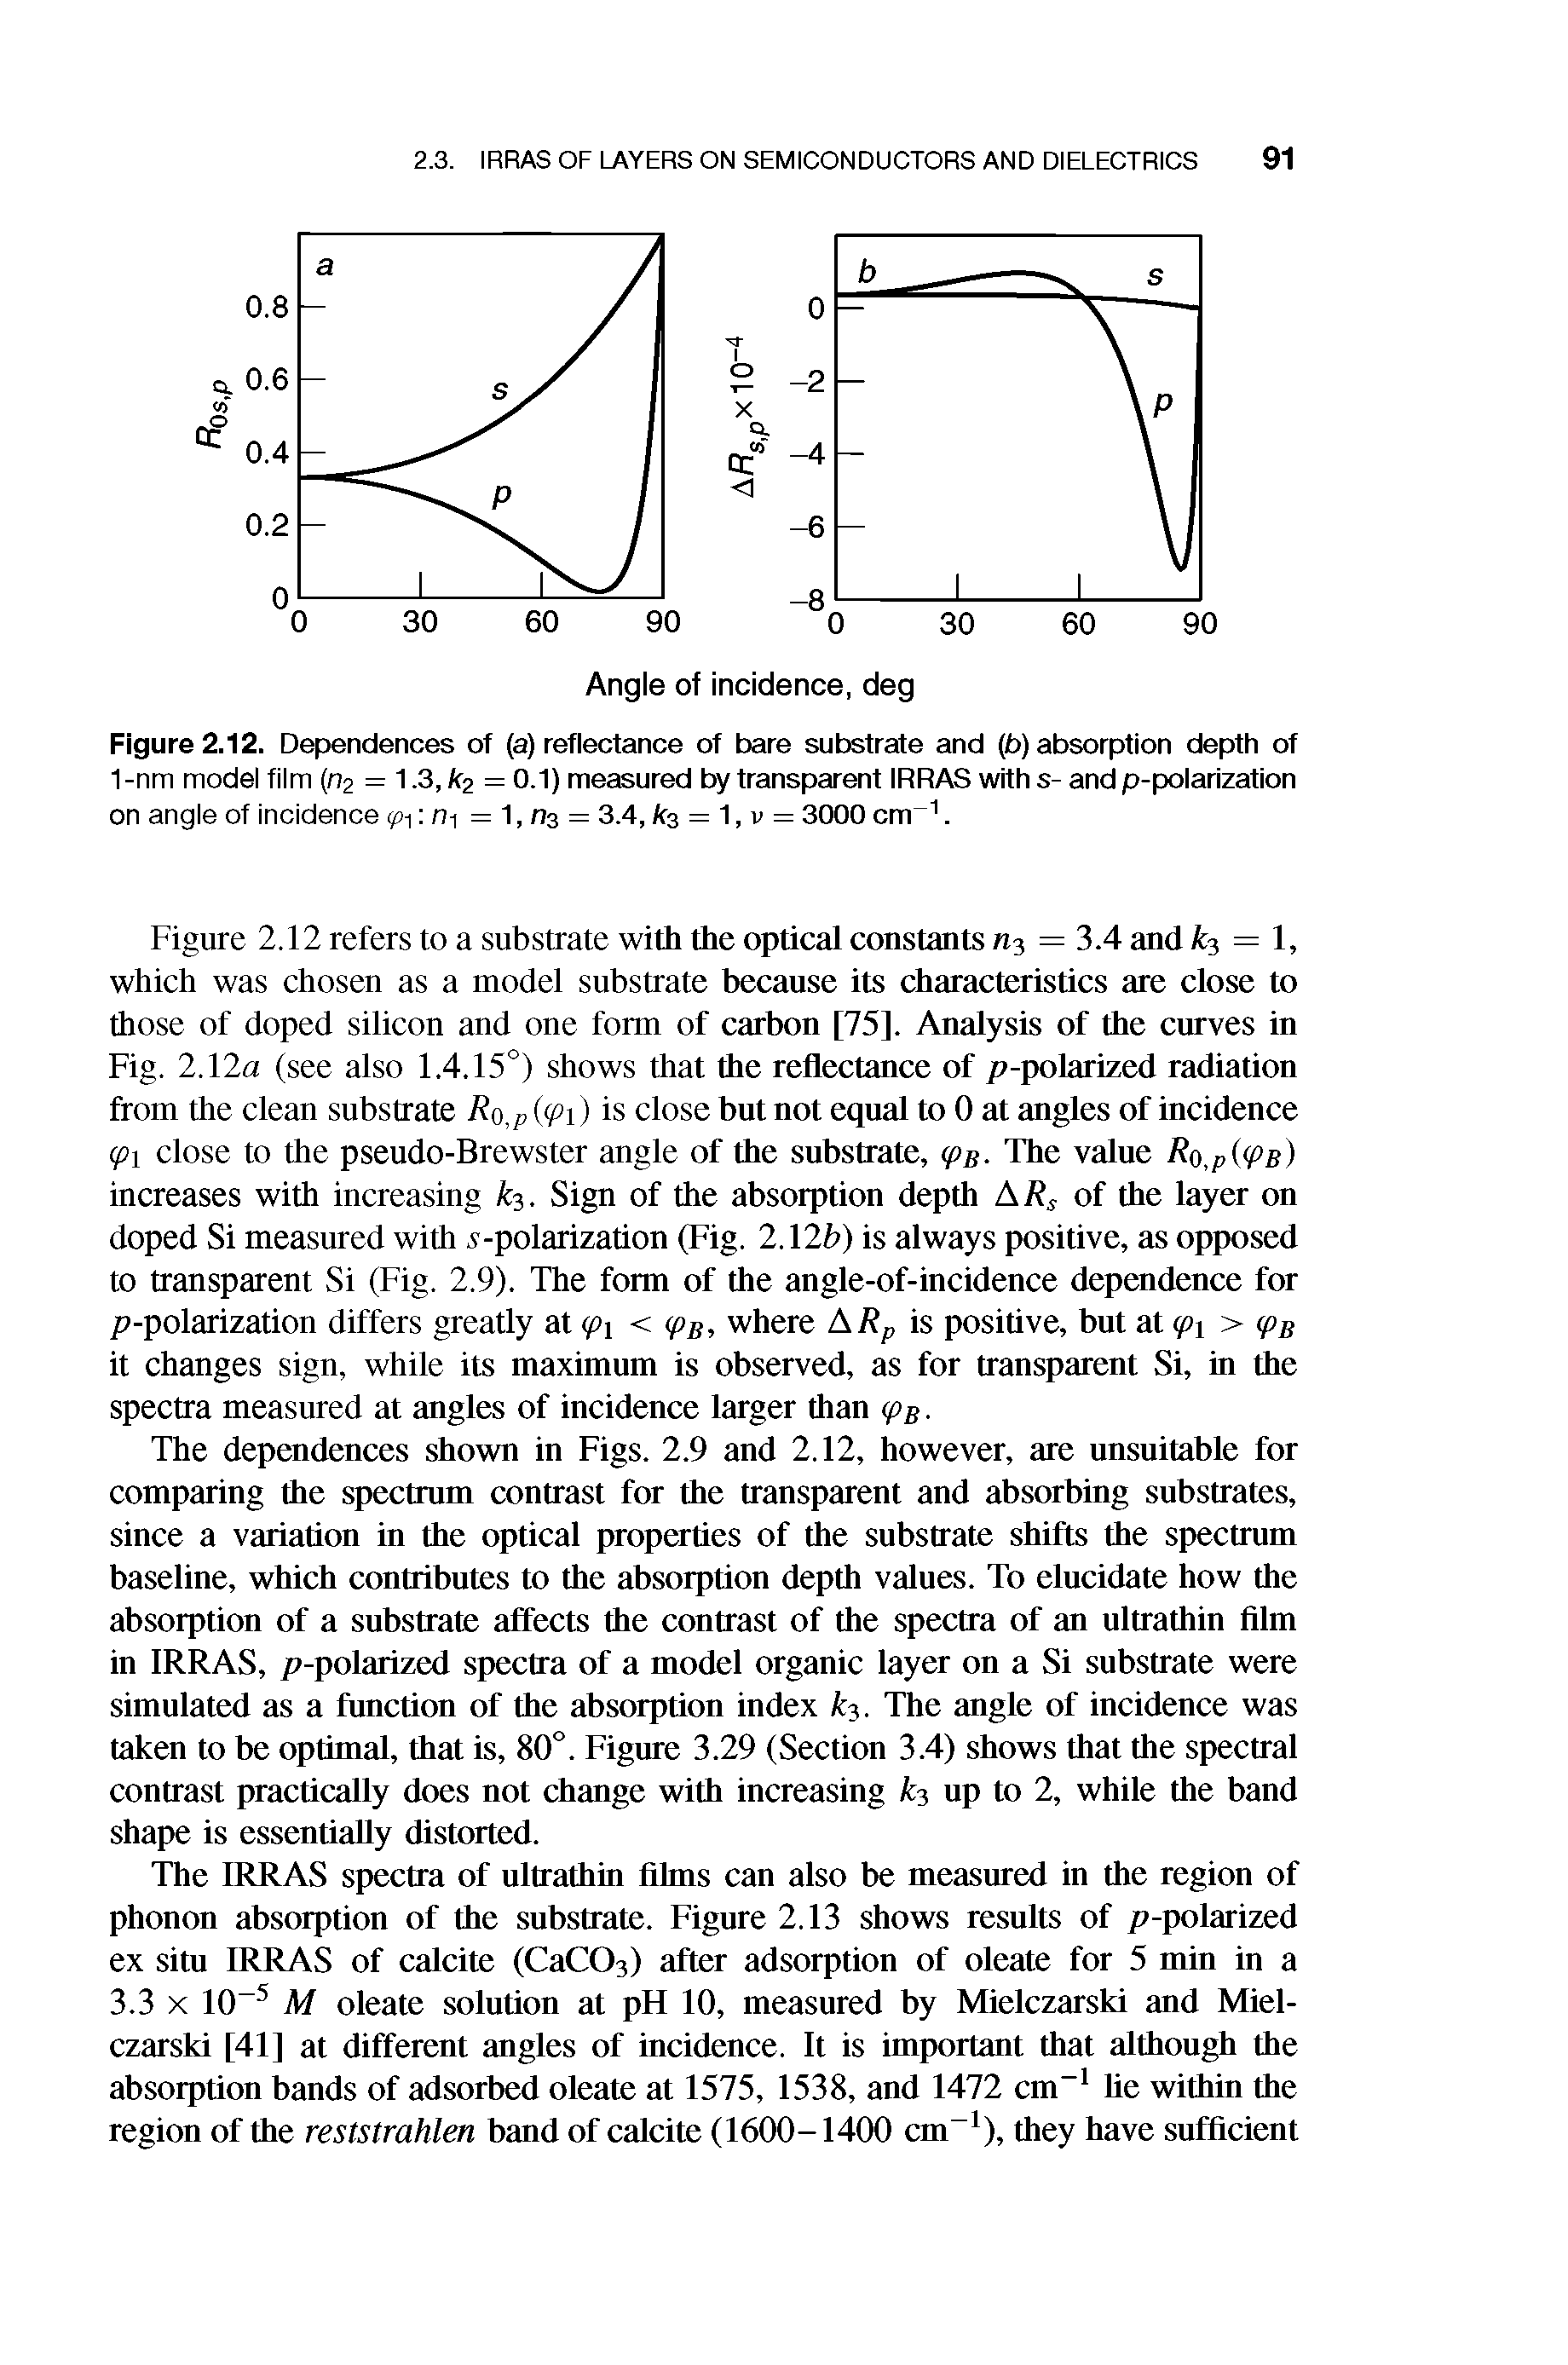 Figure 2.12 refers to a substrate with the optical constants = 3.4 and 3 = 1, which was chosen as a model substrate because its characteristics are close to those of doped silicon and one form of carbon [75]. Analysis of the cnrves in Fig. 2.12a (see also 1.4.15°) shows that the reflectance of p-polarized radiation from the clean substrate Ro,p ((pi) is close but not eqnal to 0 at angles of incidence (pi close to the pseudo-Brewster angle of the substrate, The value Ro,p <Pb) increases with increasing k. Sign of the absorption depth of the layer on doped Si measured with -polarization (Fig. 2.12b) is always positive, as opposed to transparent Si (Fig. 2.9). The form of the angle-of-incidence dependence for p-polarization differs greatly at (pi < (ps, where ARp is positive, but at <pi > cps it changes sign, while its maximum is observed, as for transparent Si, in the spectra measured at angles of incidence larger than (ps.